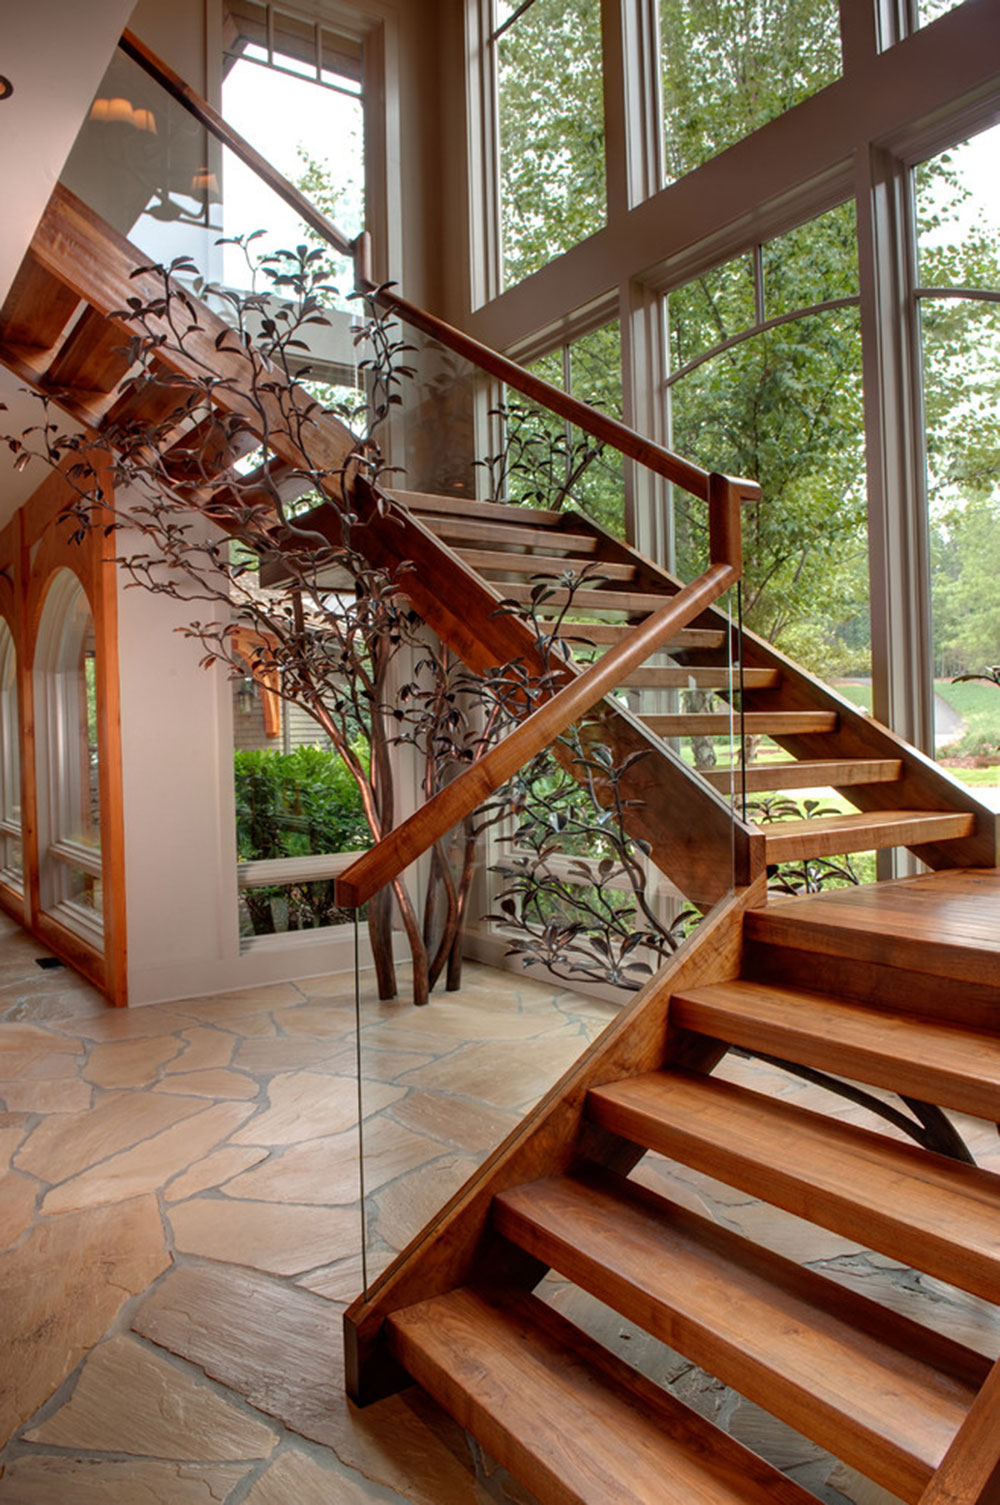 Modern-And-Exquisite-Floating-Staircase7 Modern And Exquisite Floating Staircase Designs